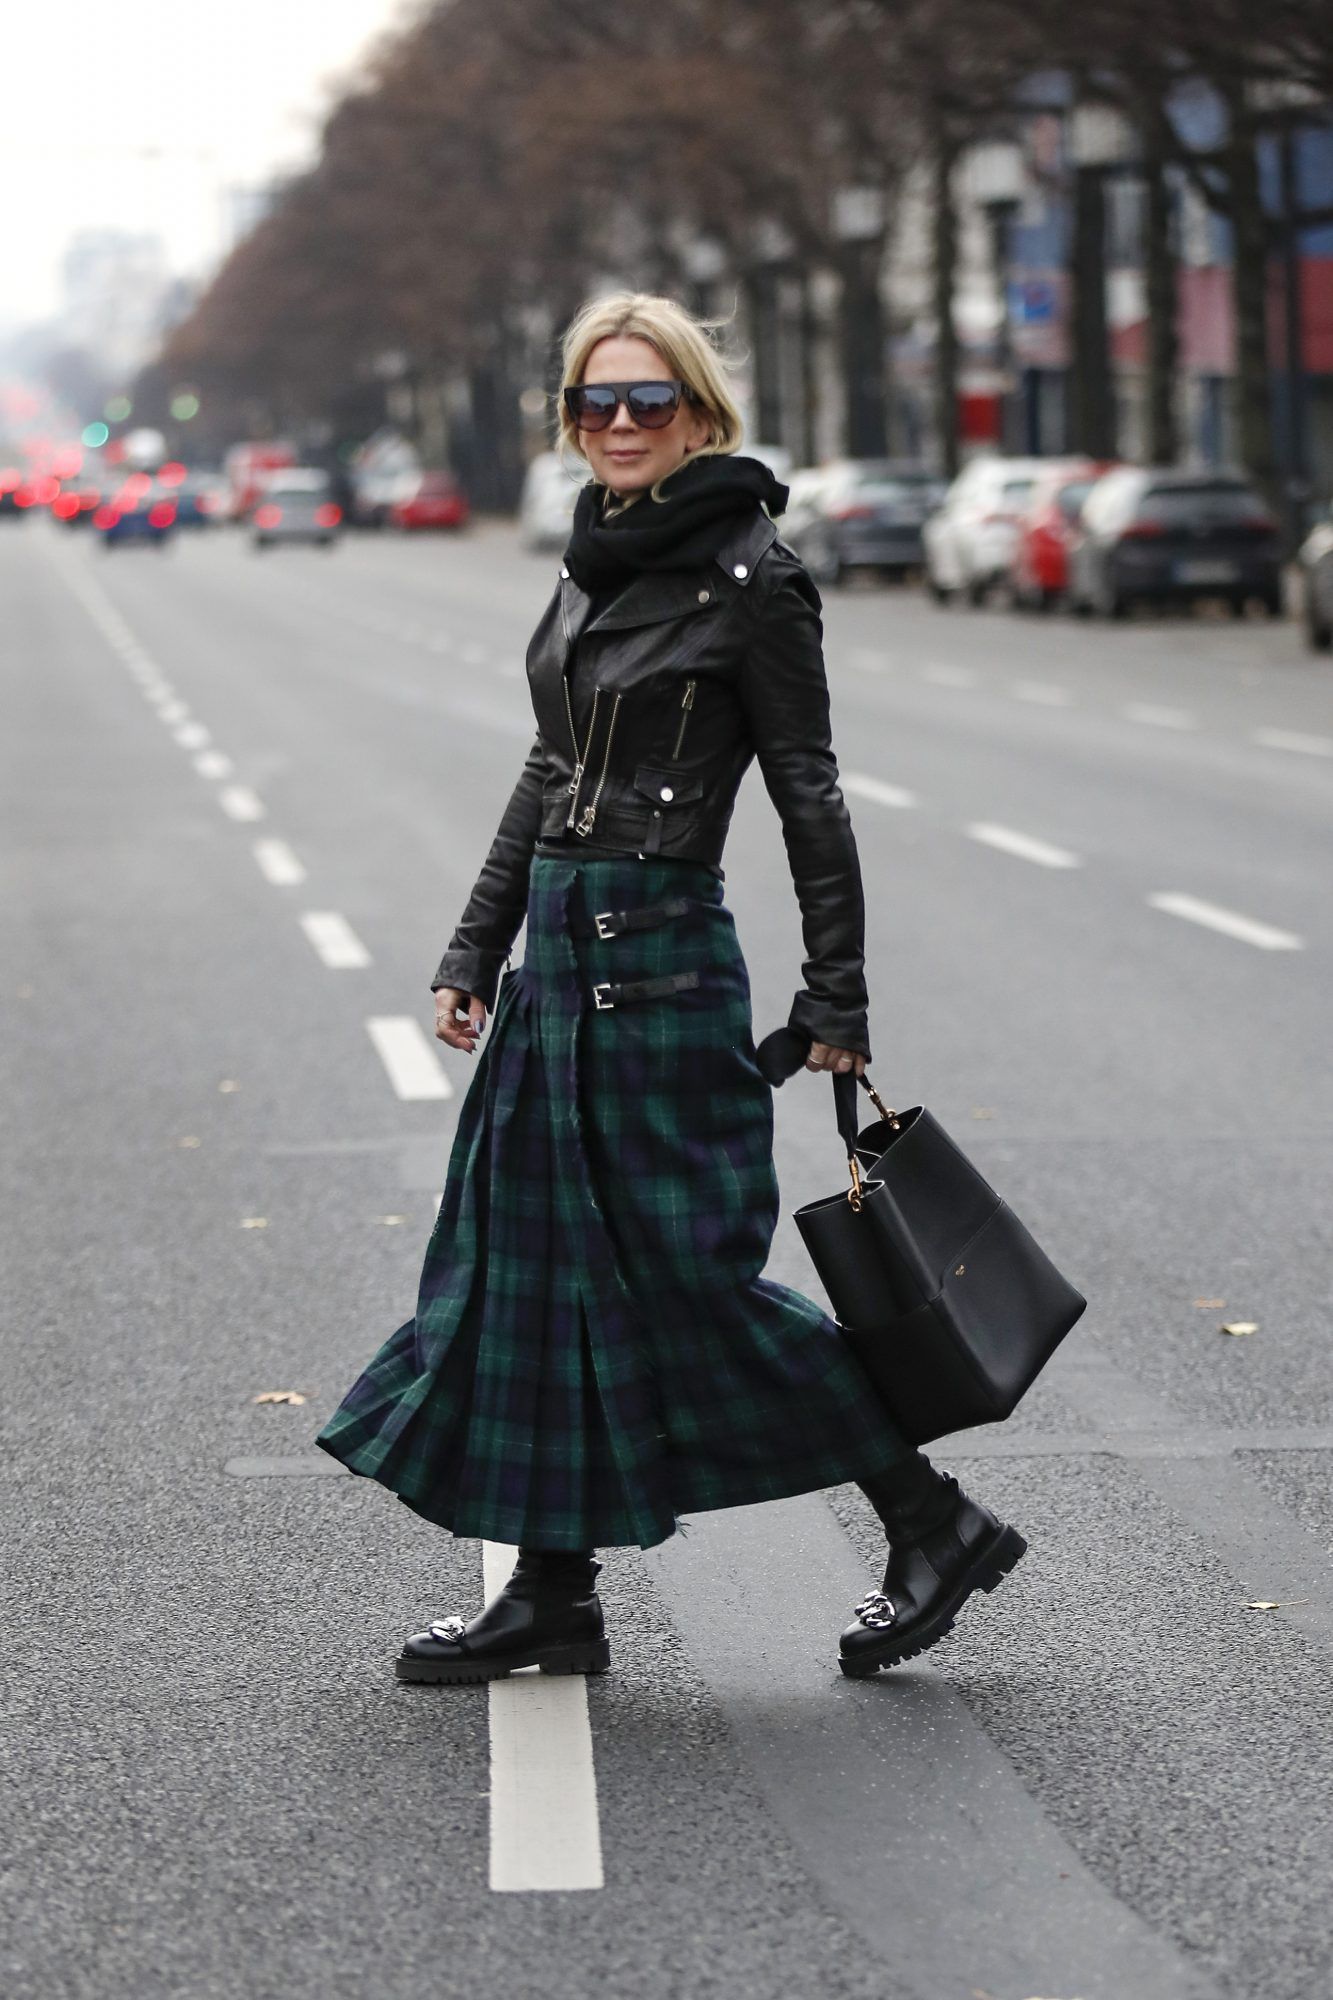 Plaid Perfection: Stay Stylish in Plaid Skirts